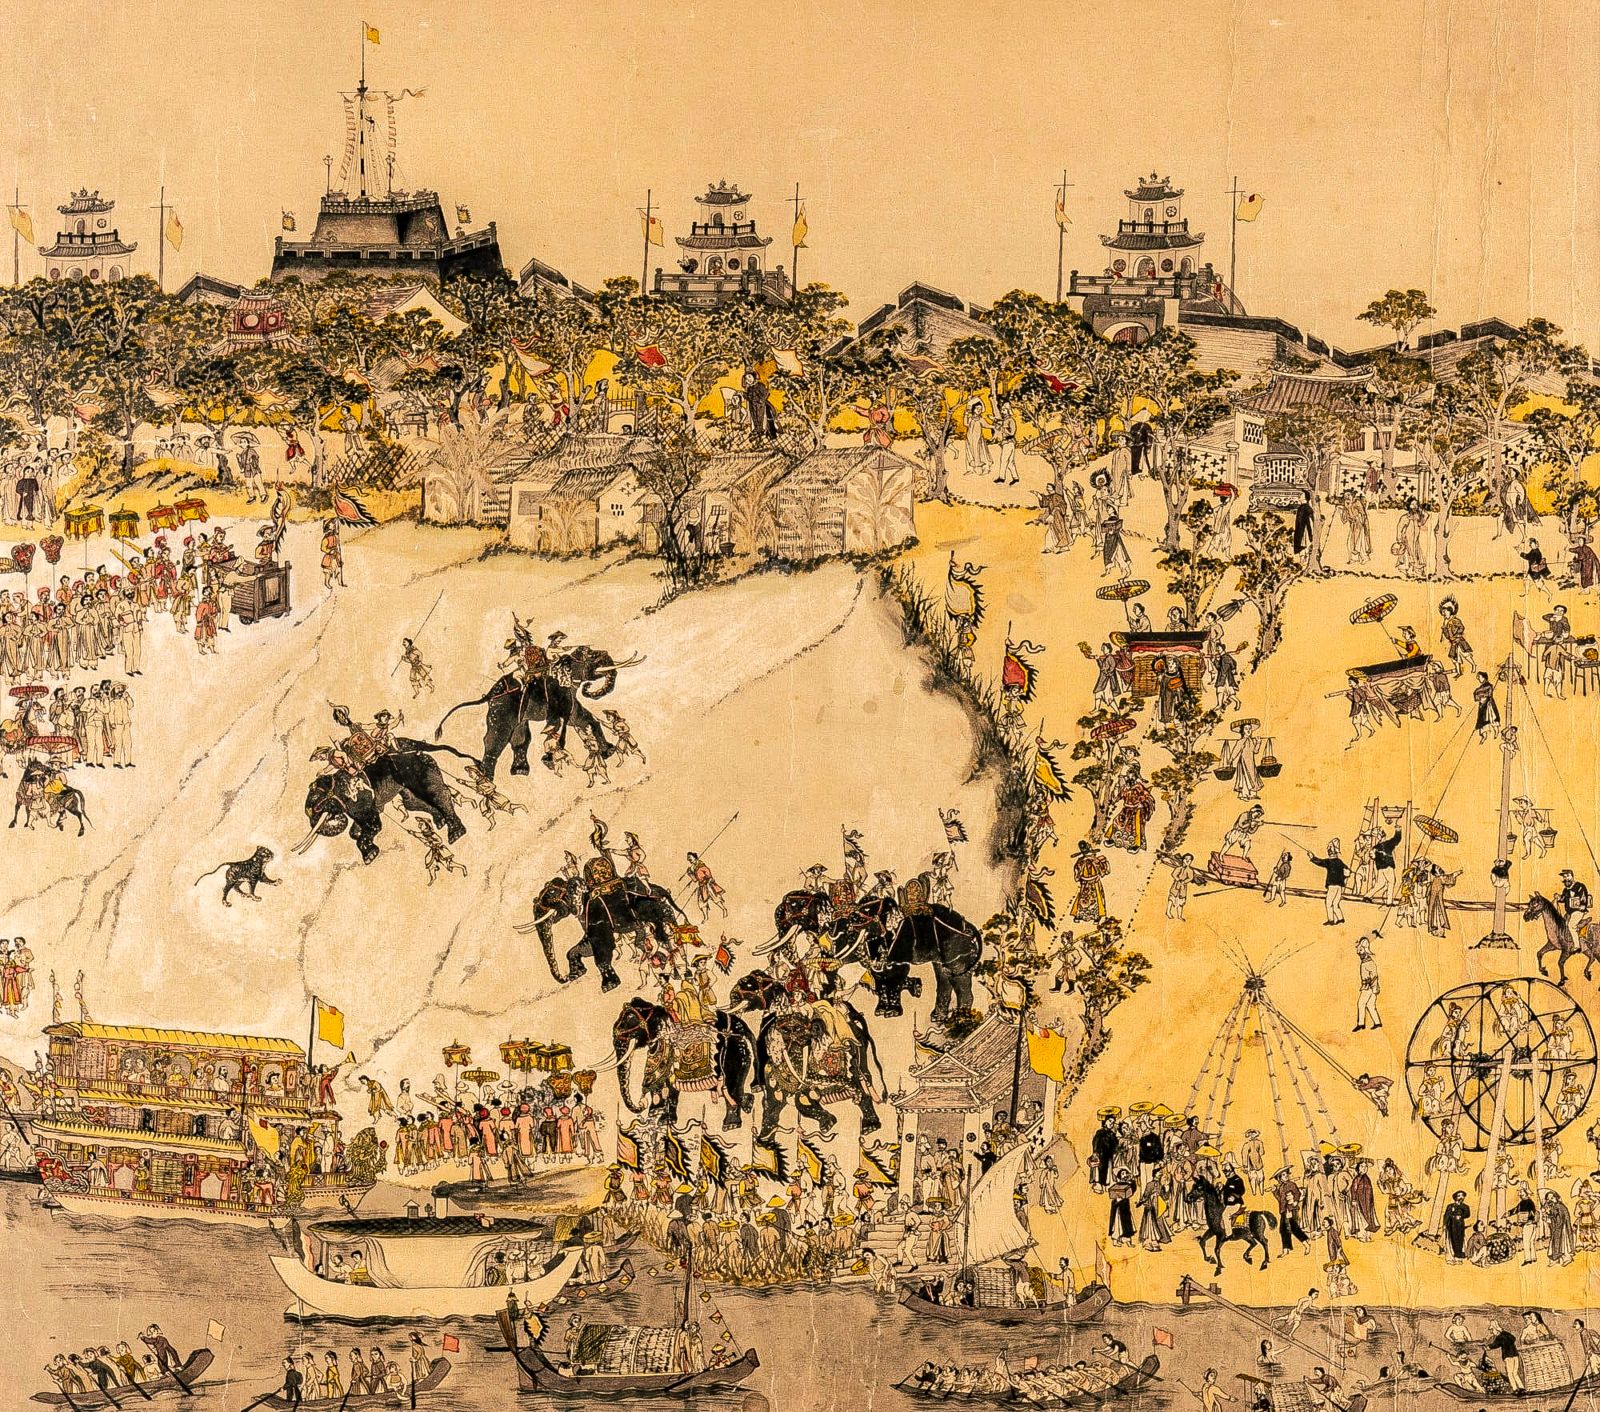 Elephant and tiger fights in the early 20th century through the painting "New Year's Day in Phu Xuan"